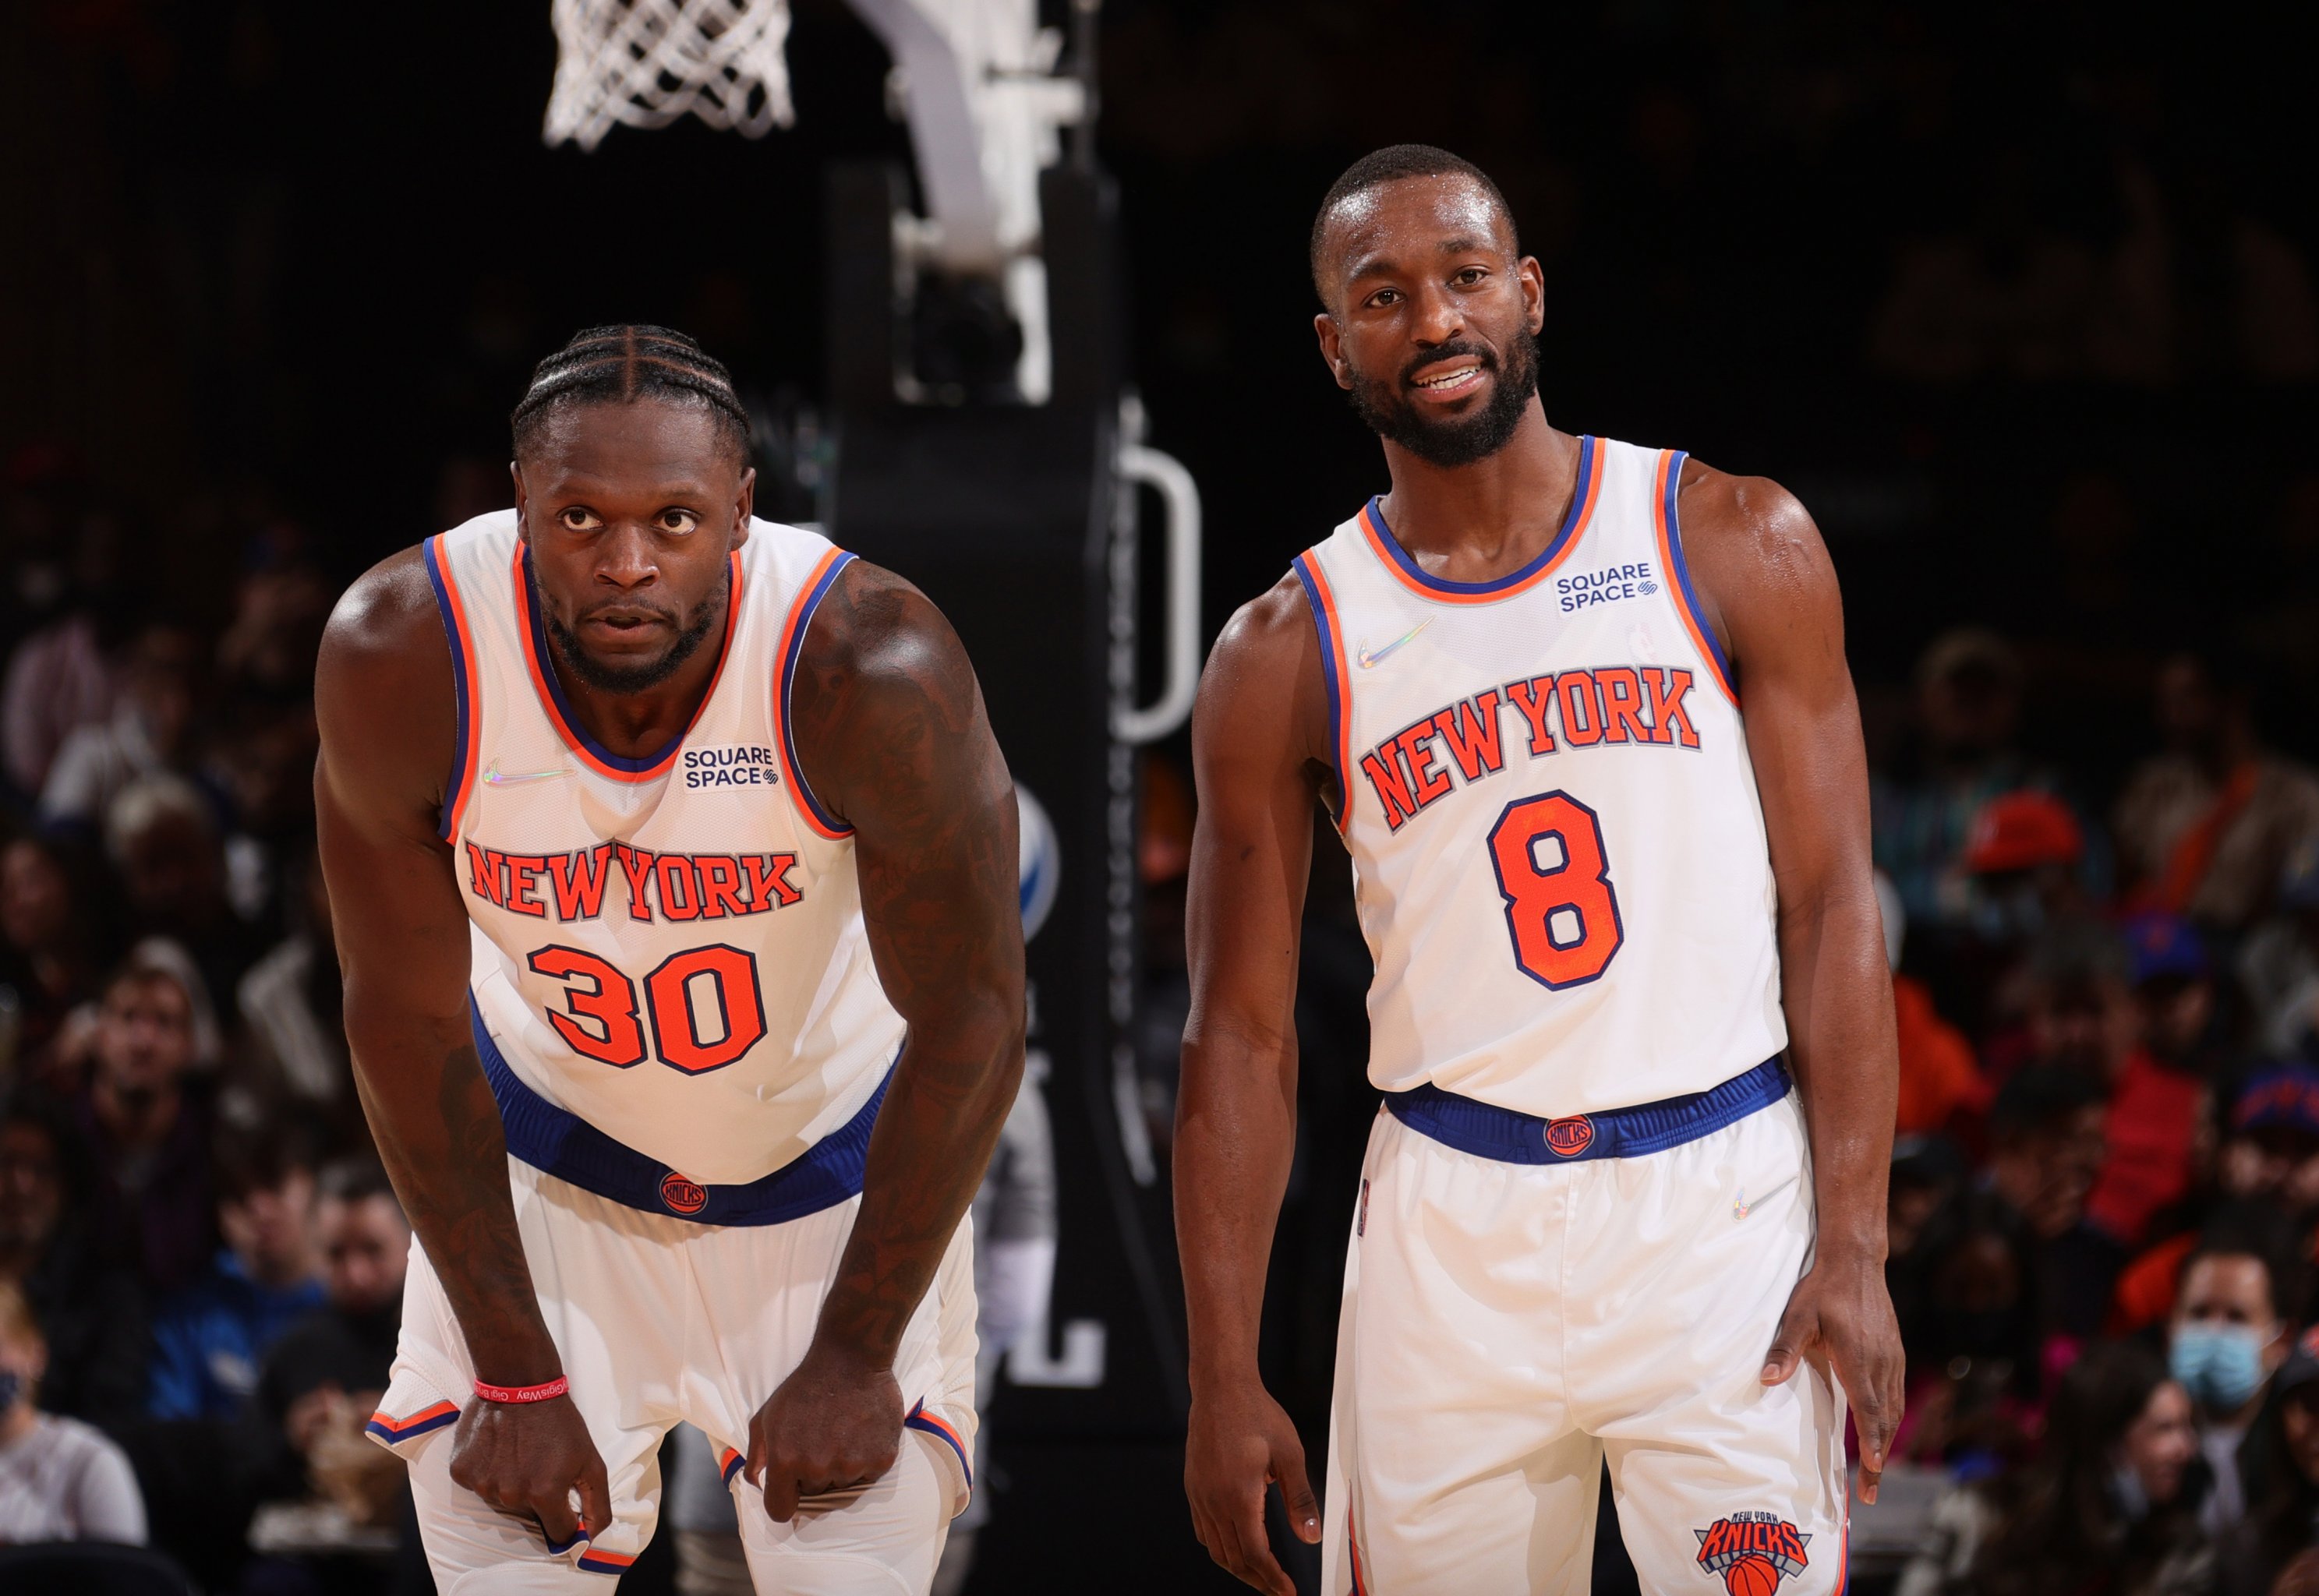 NEW YORK KNICKS on X: Gearing up. Our 2021-22 uniform schedule